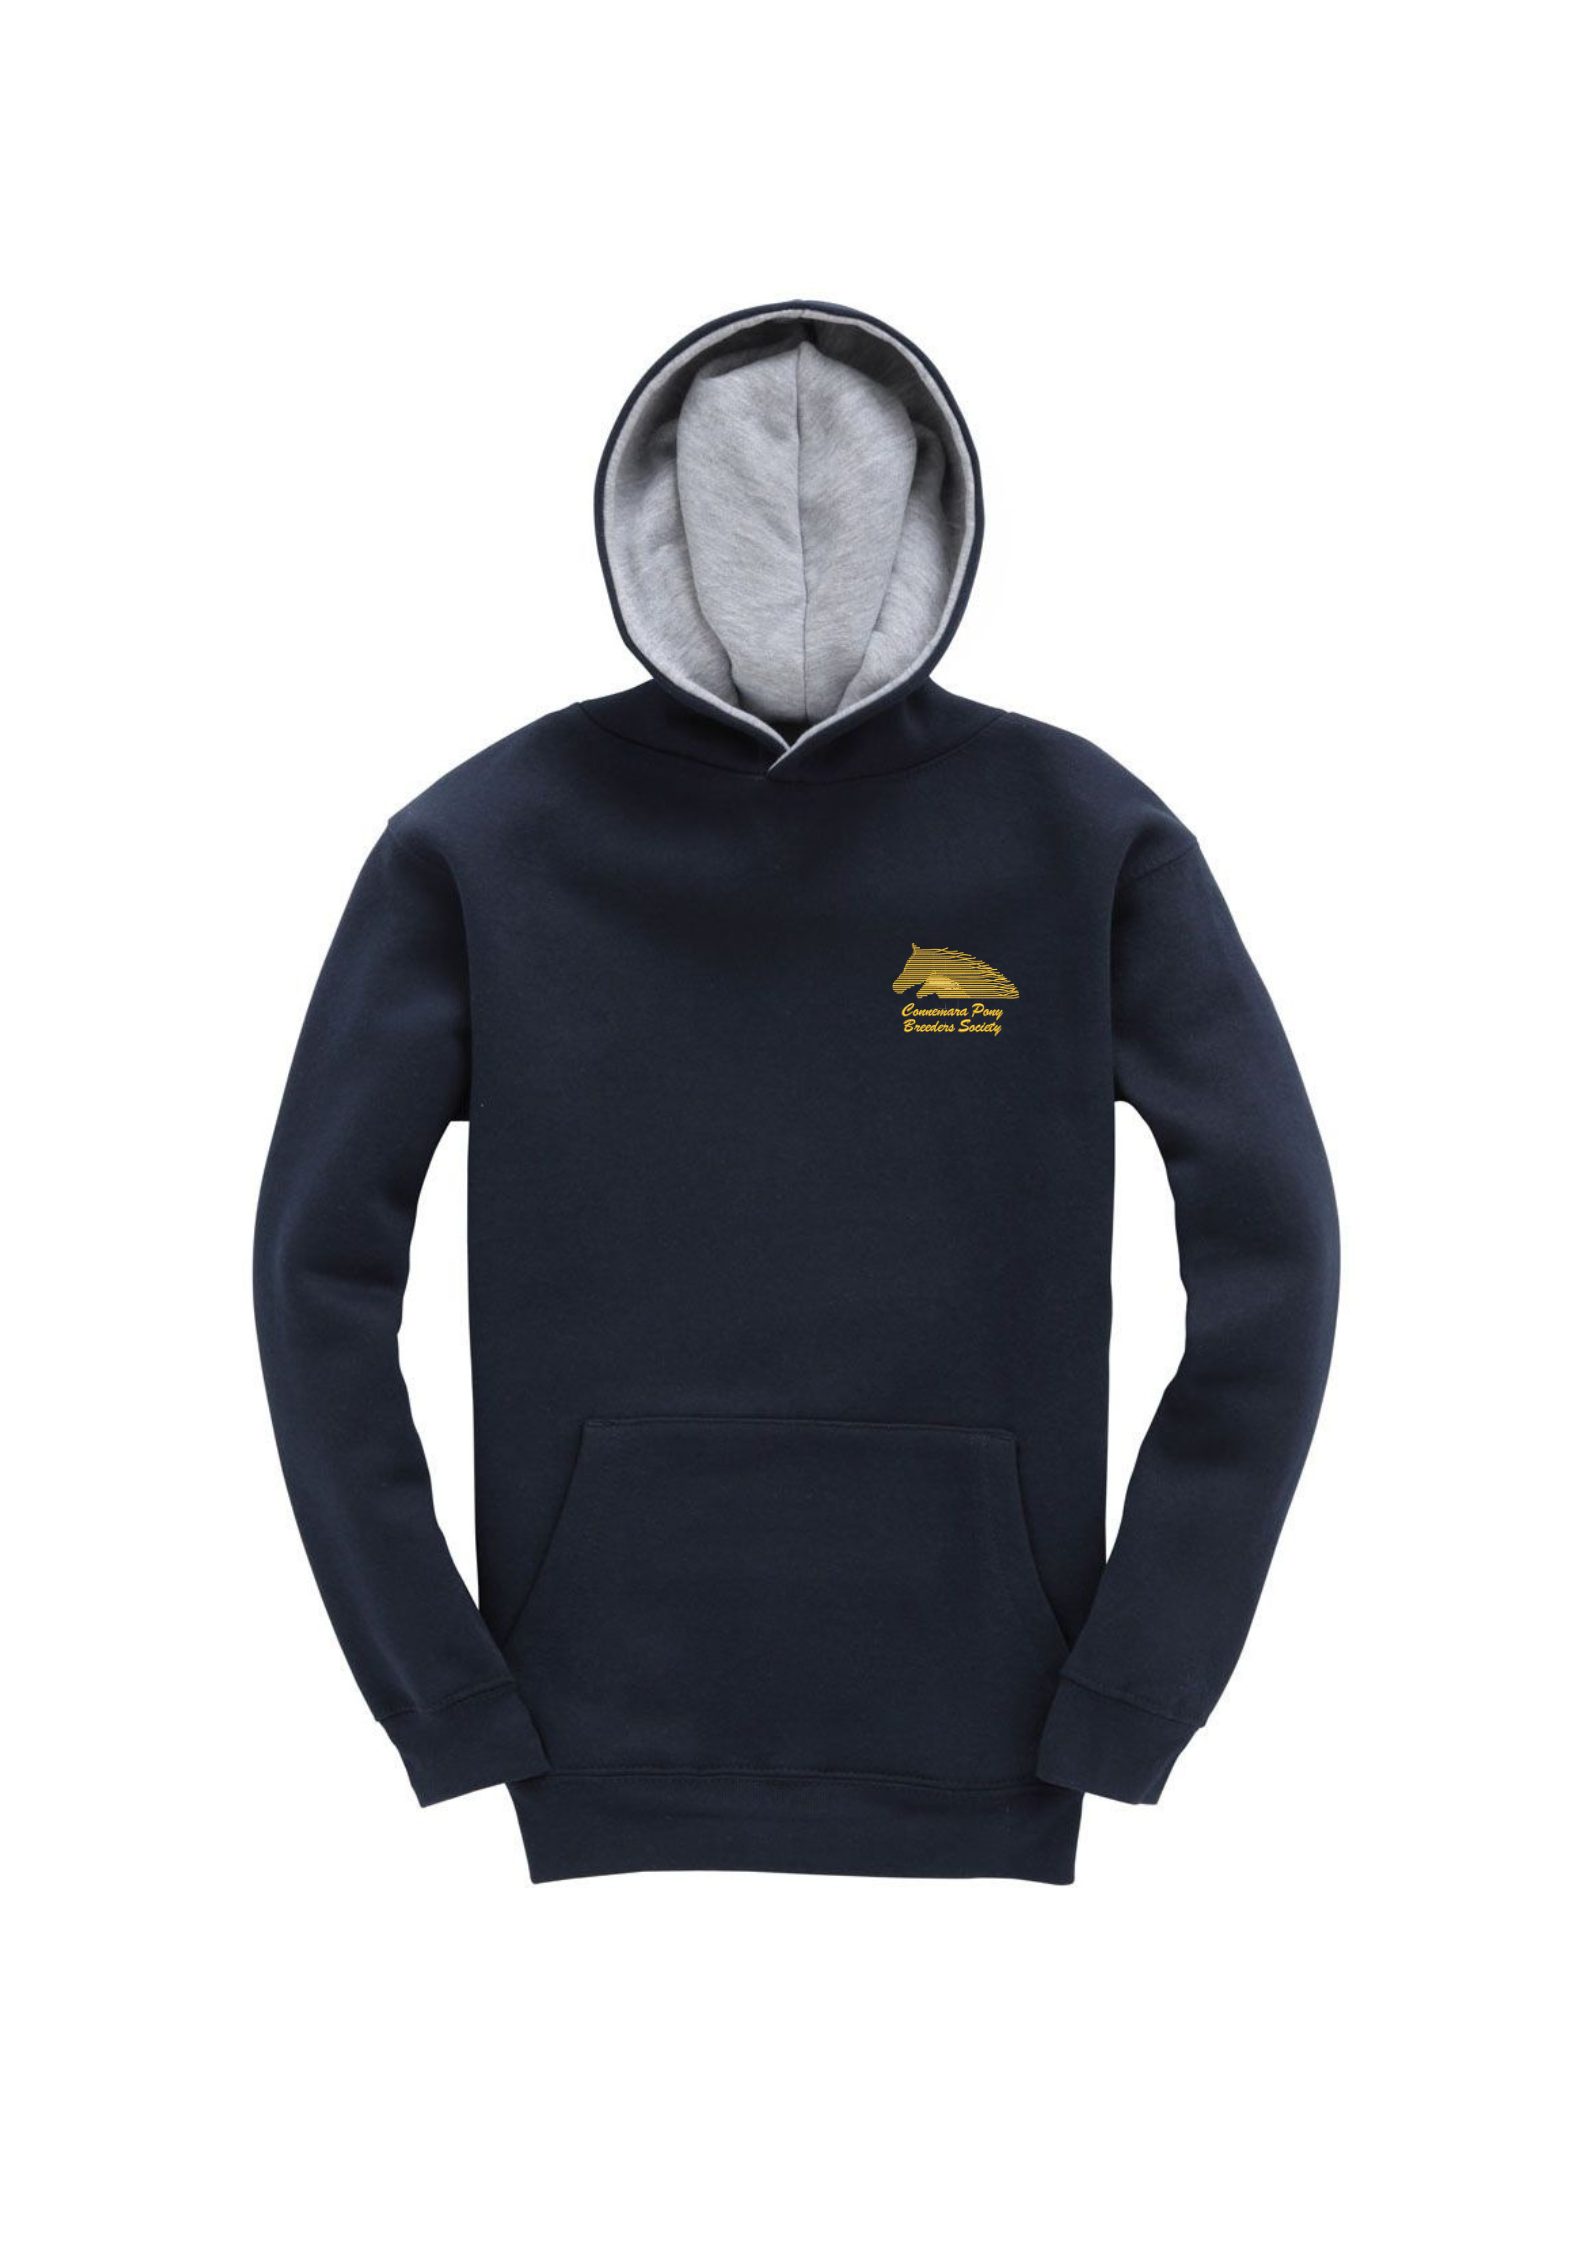 CPBS-Child-Hoody-Navy-CPBSW73K